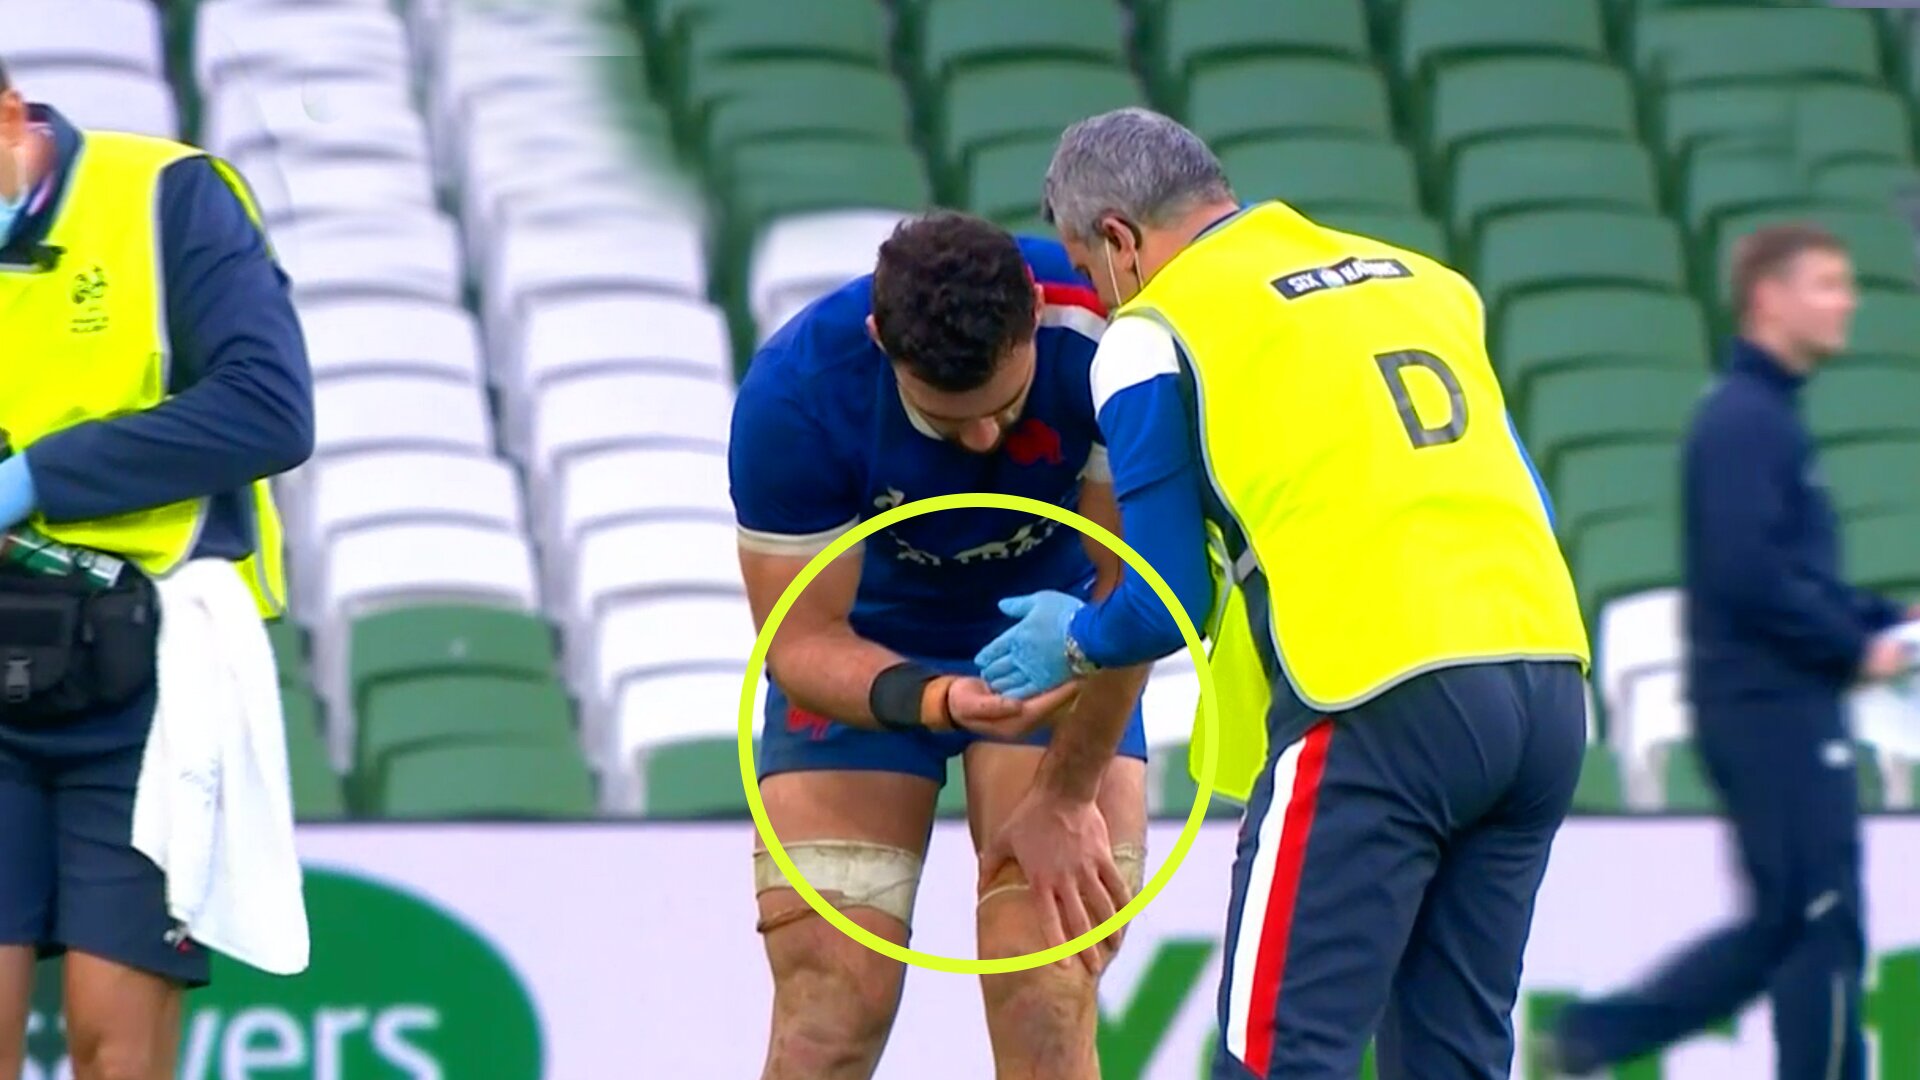 Investigation as footage shows French captain Charles Ollivon ingesting super-enhancer in middle of game